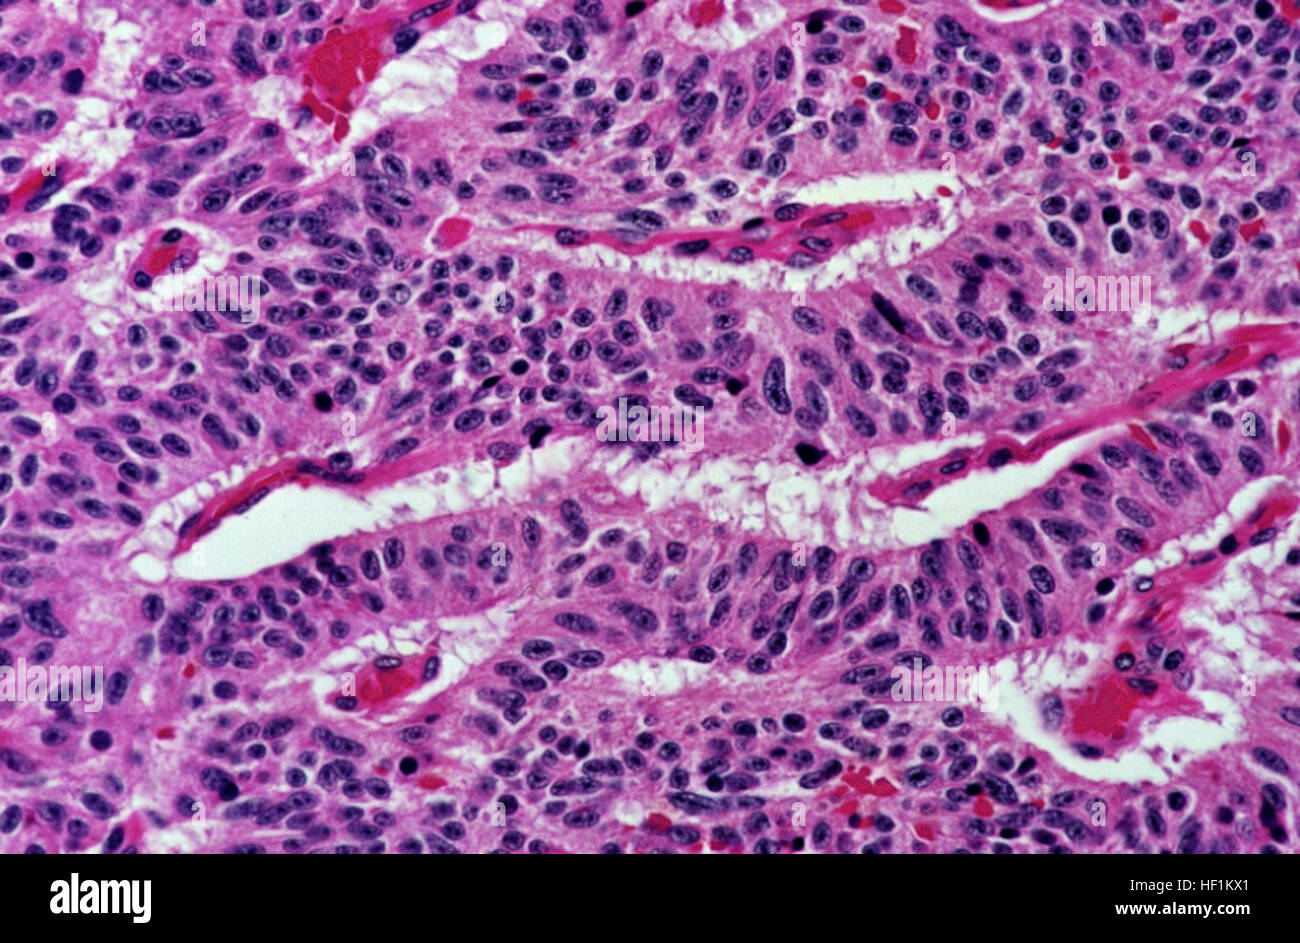 Typical carcinoid tumor of the lung, trabecular pattern Stock Photo